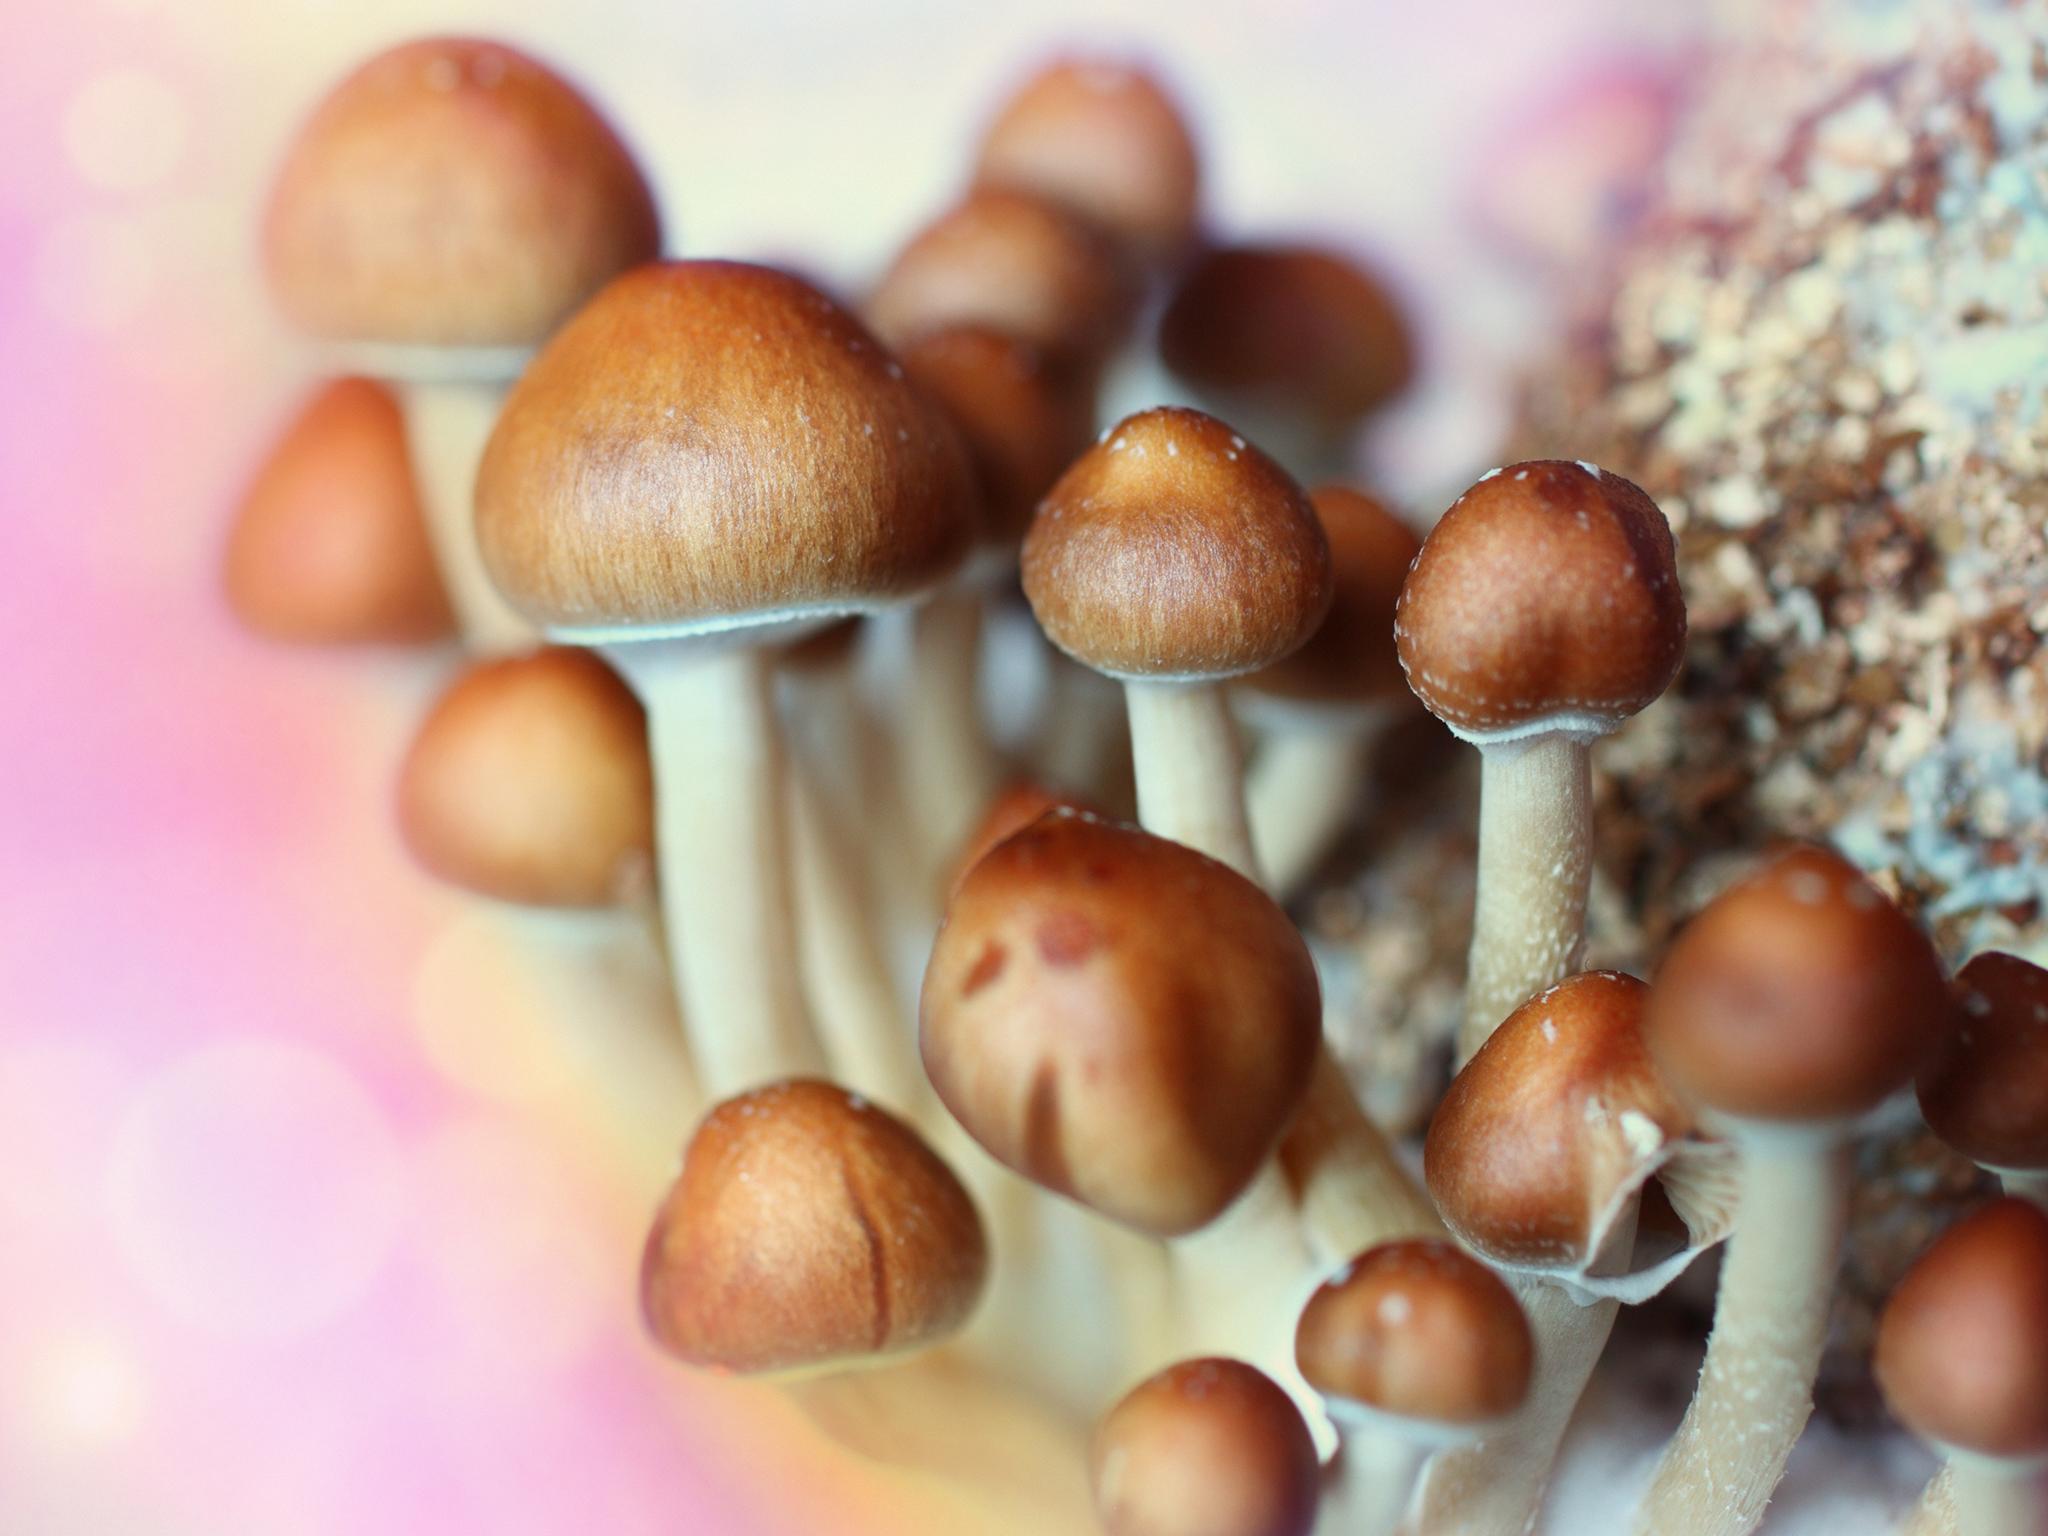 Psychedelic mushrooms may soon be legal in California